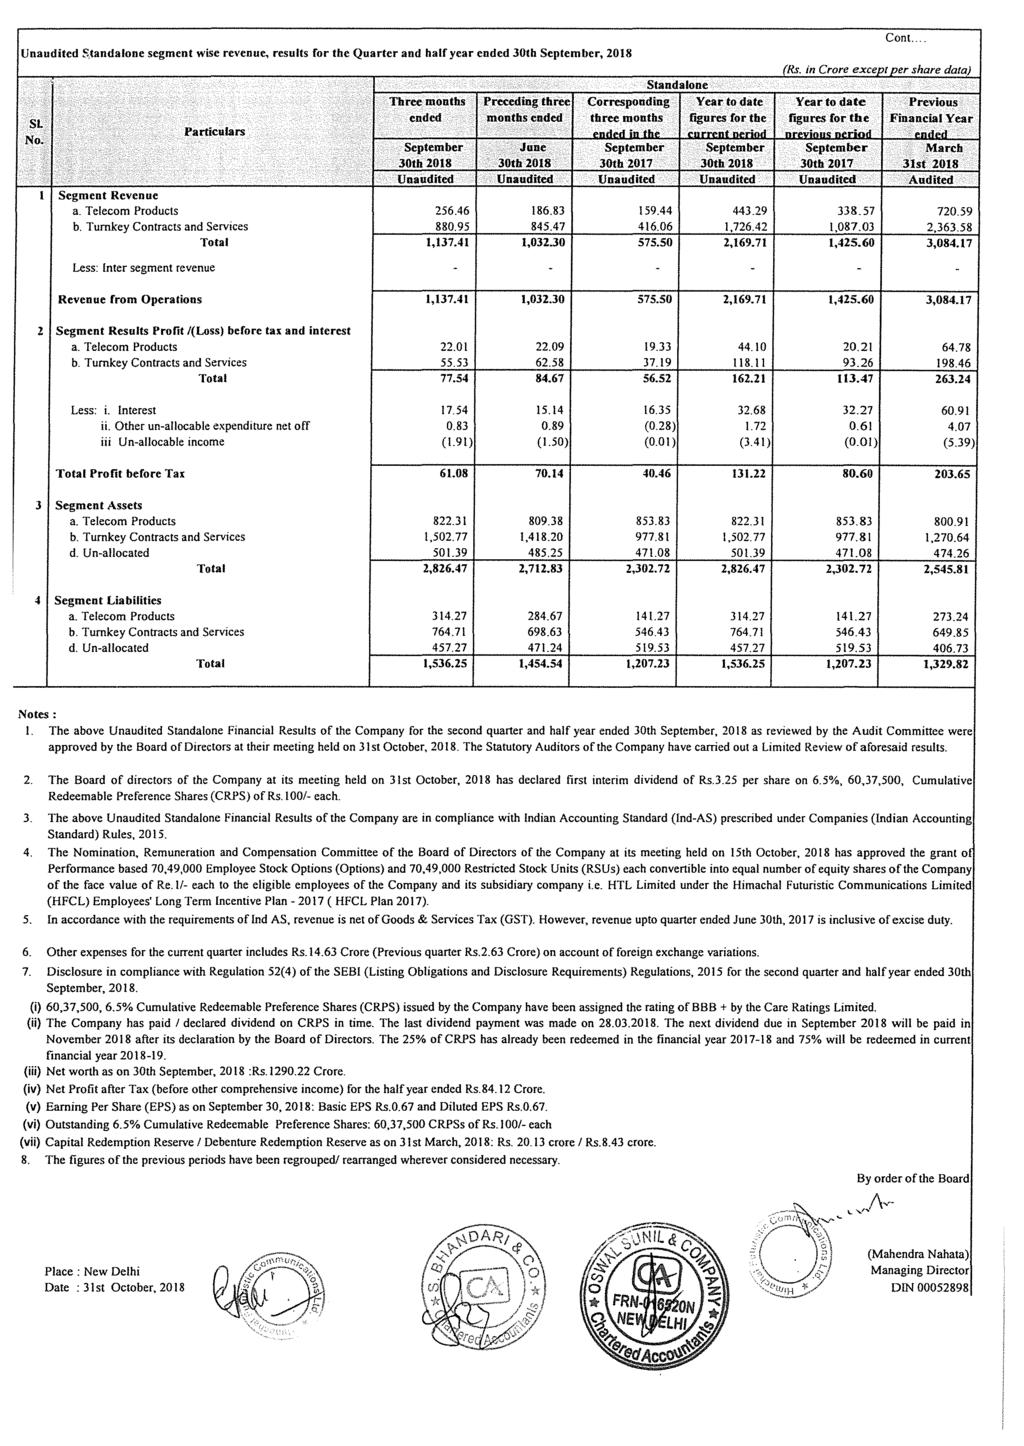 Cont Unaudited S,tandalone segment wise revenue, results for the Quarter and half year ended 30th September, 2018 (Rs in Crore except per share data) Standalone Three months Preceding three